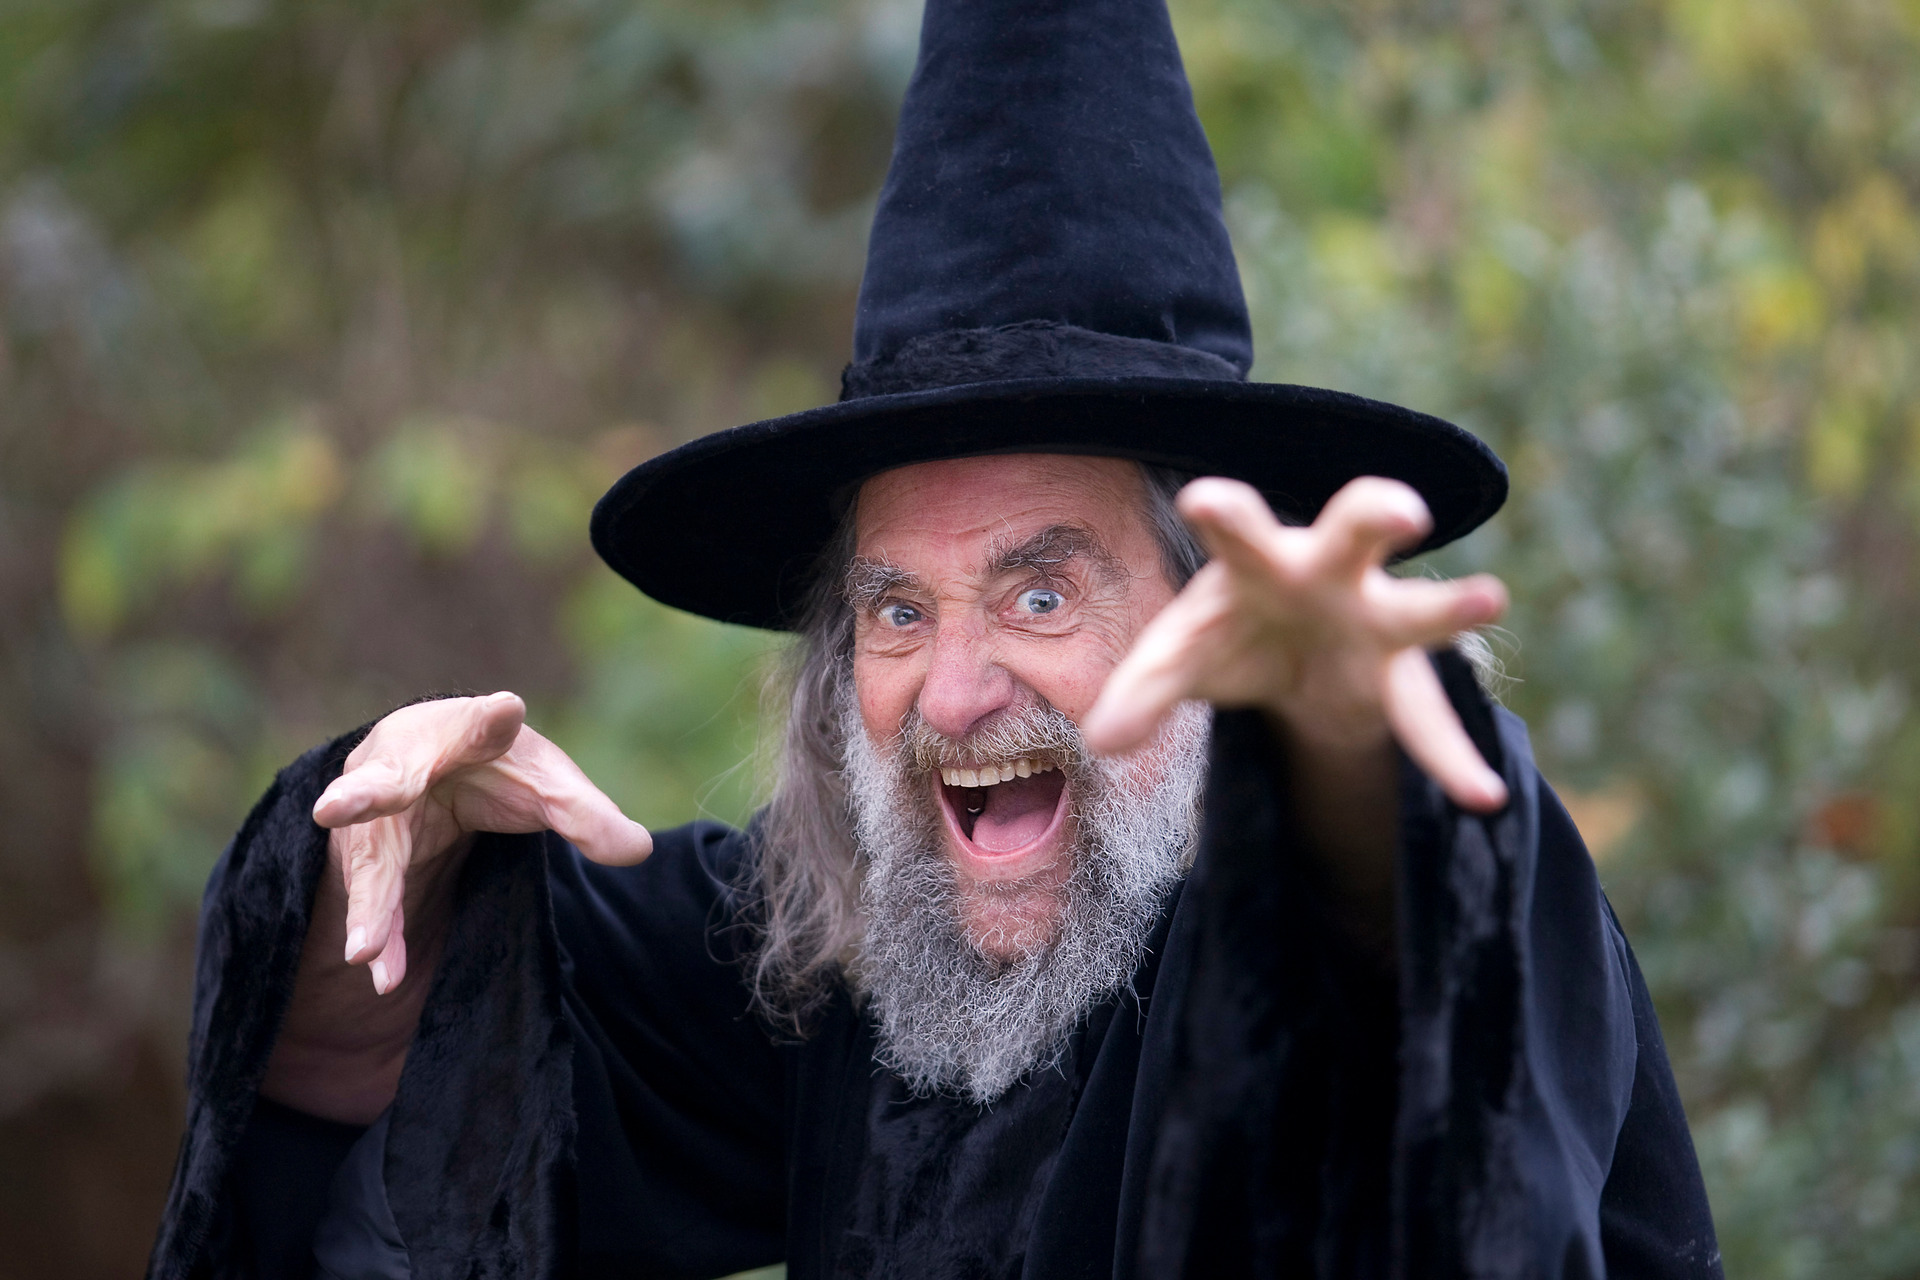 An Official Wizard in New Zealand Loses His Job - The New York Times